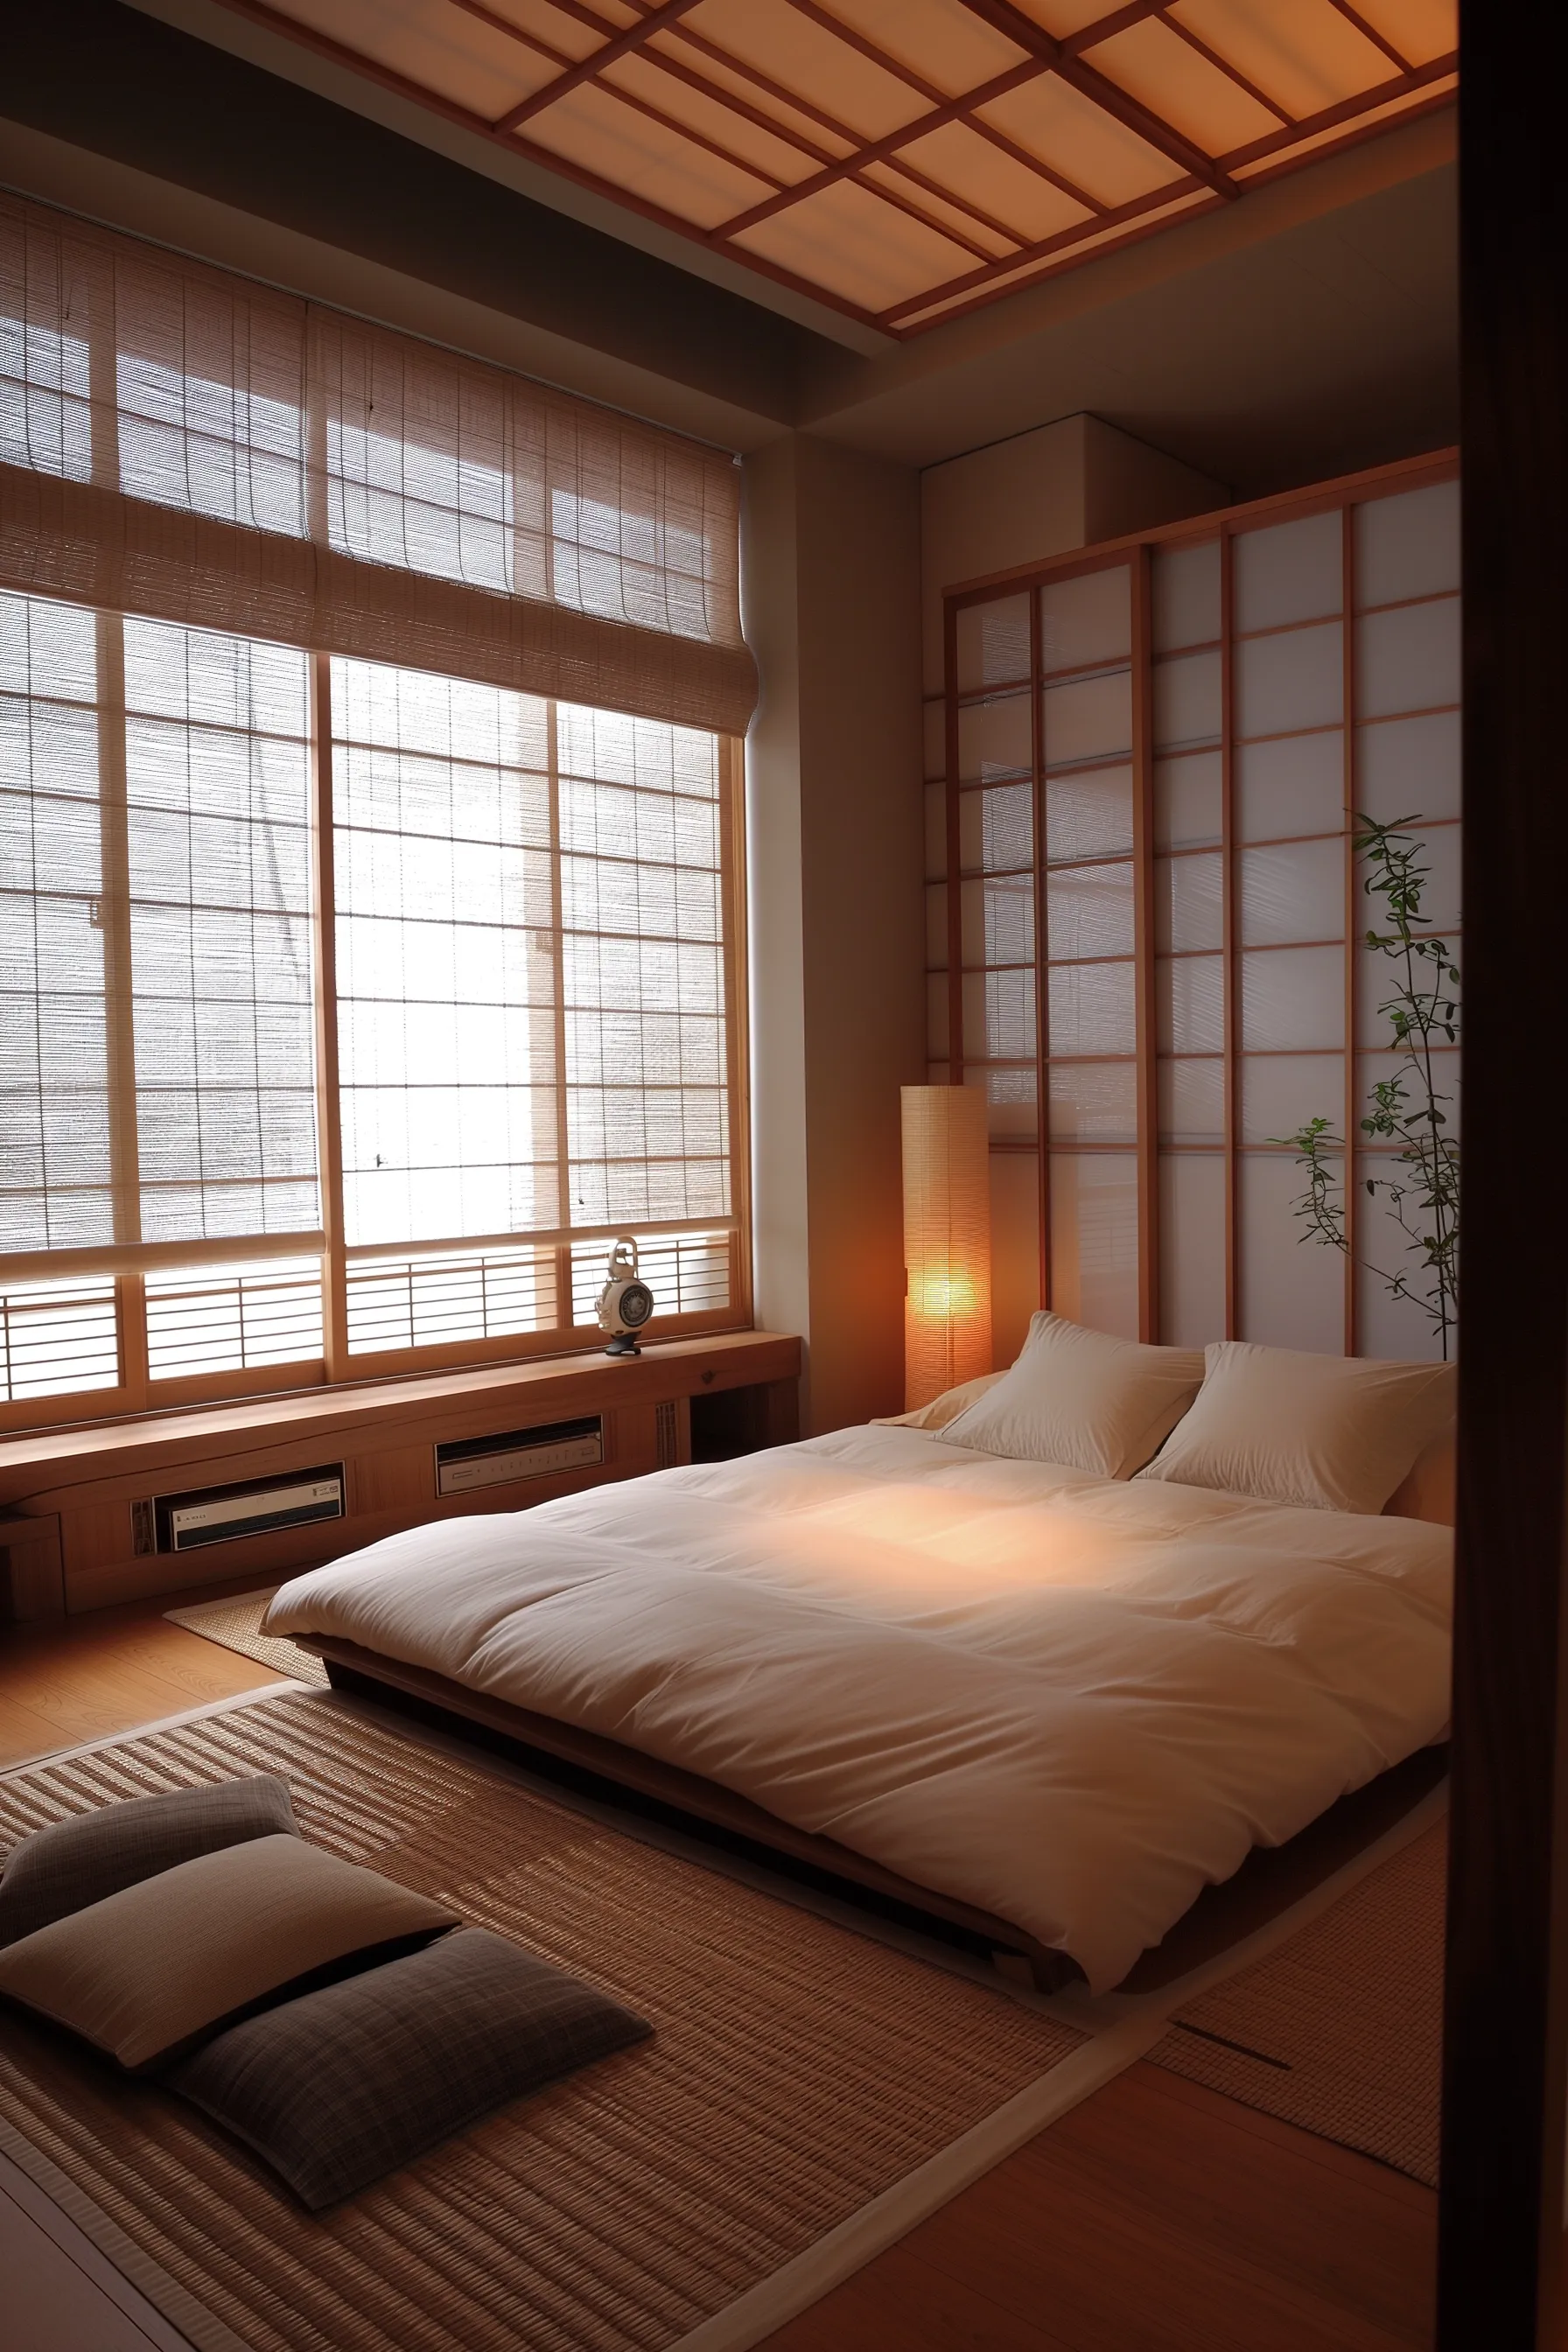 A tatami mat in a Japanese Bedroom